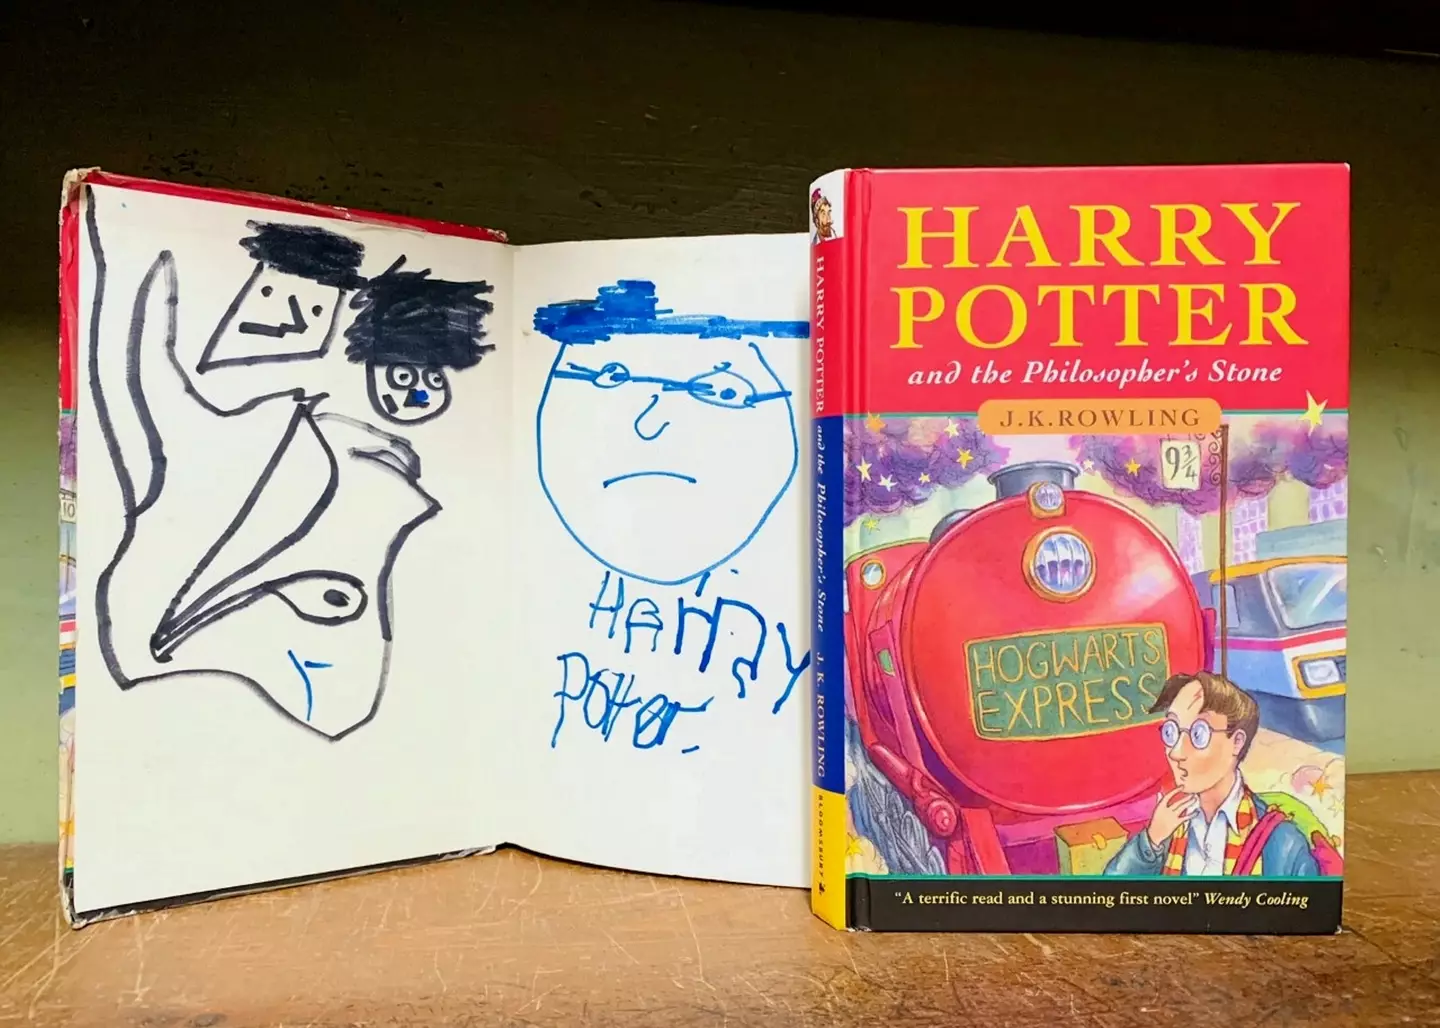 First edition Harry Potter book (SWNS)